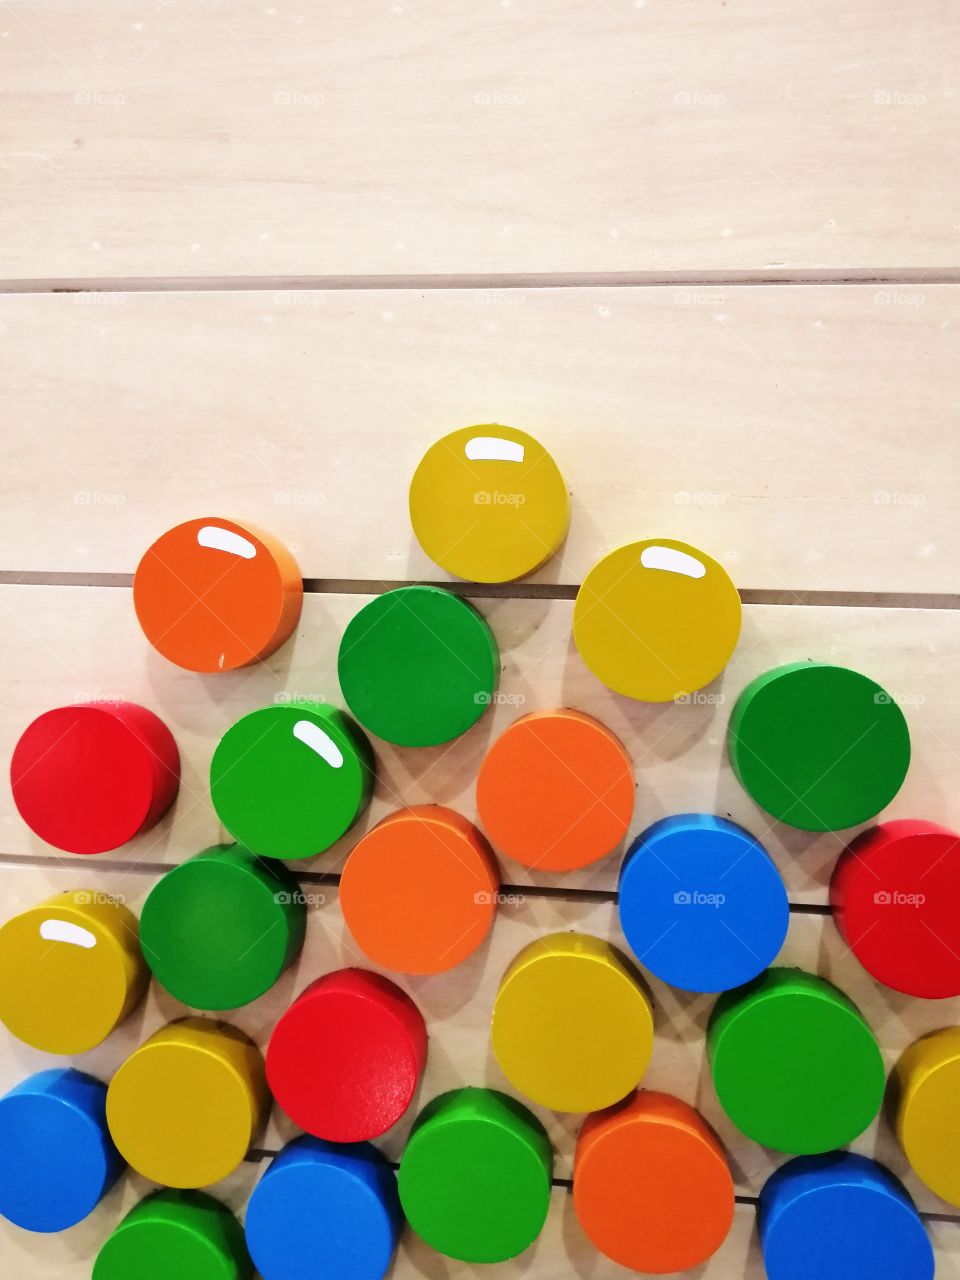 Colorful circles that were attached on wood.